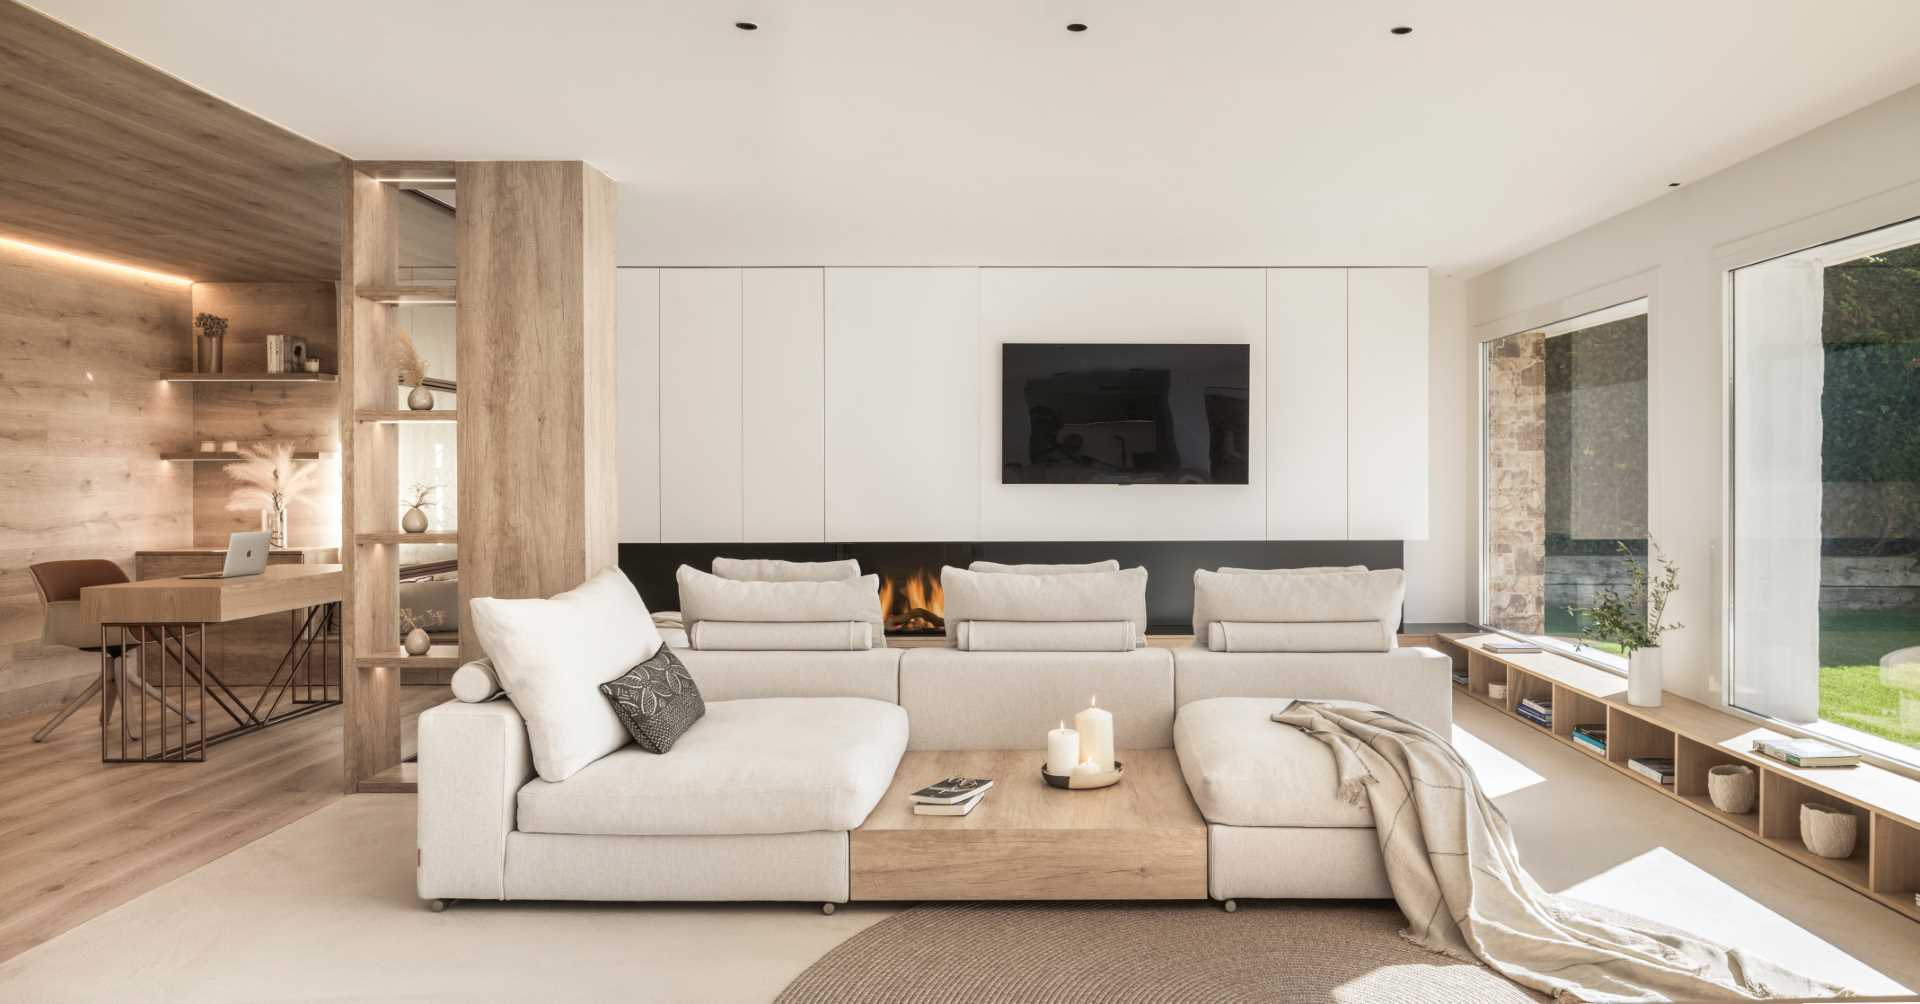 In this modern living room, a square sofa takes center stage, while a custom designed storage unit runs underneath the windows, and meets up with the hearth of the fireplace.